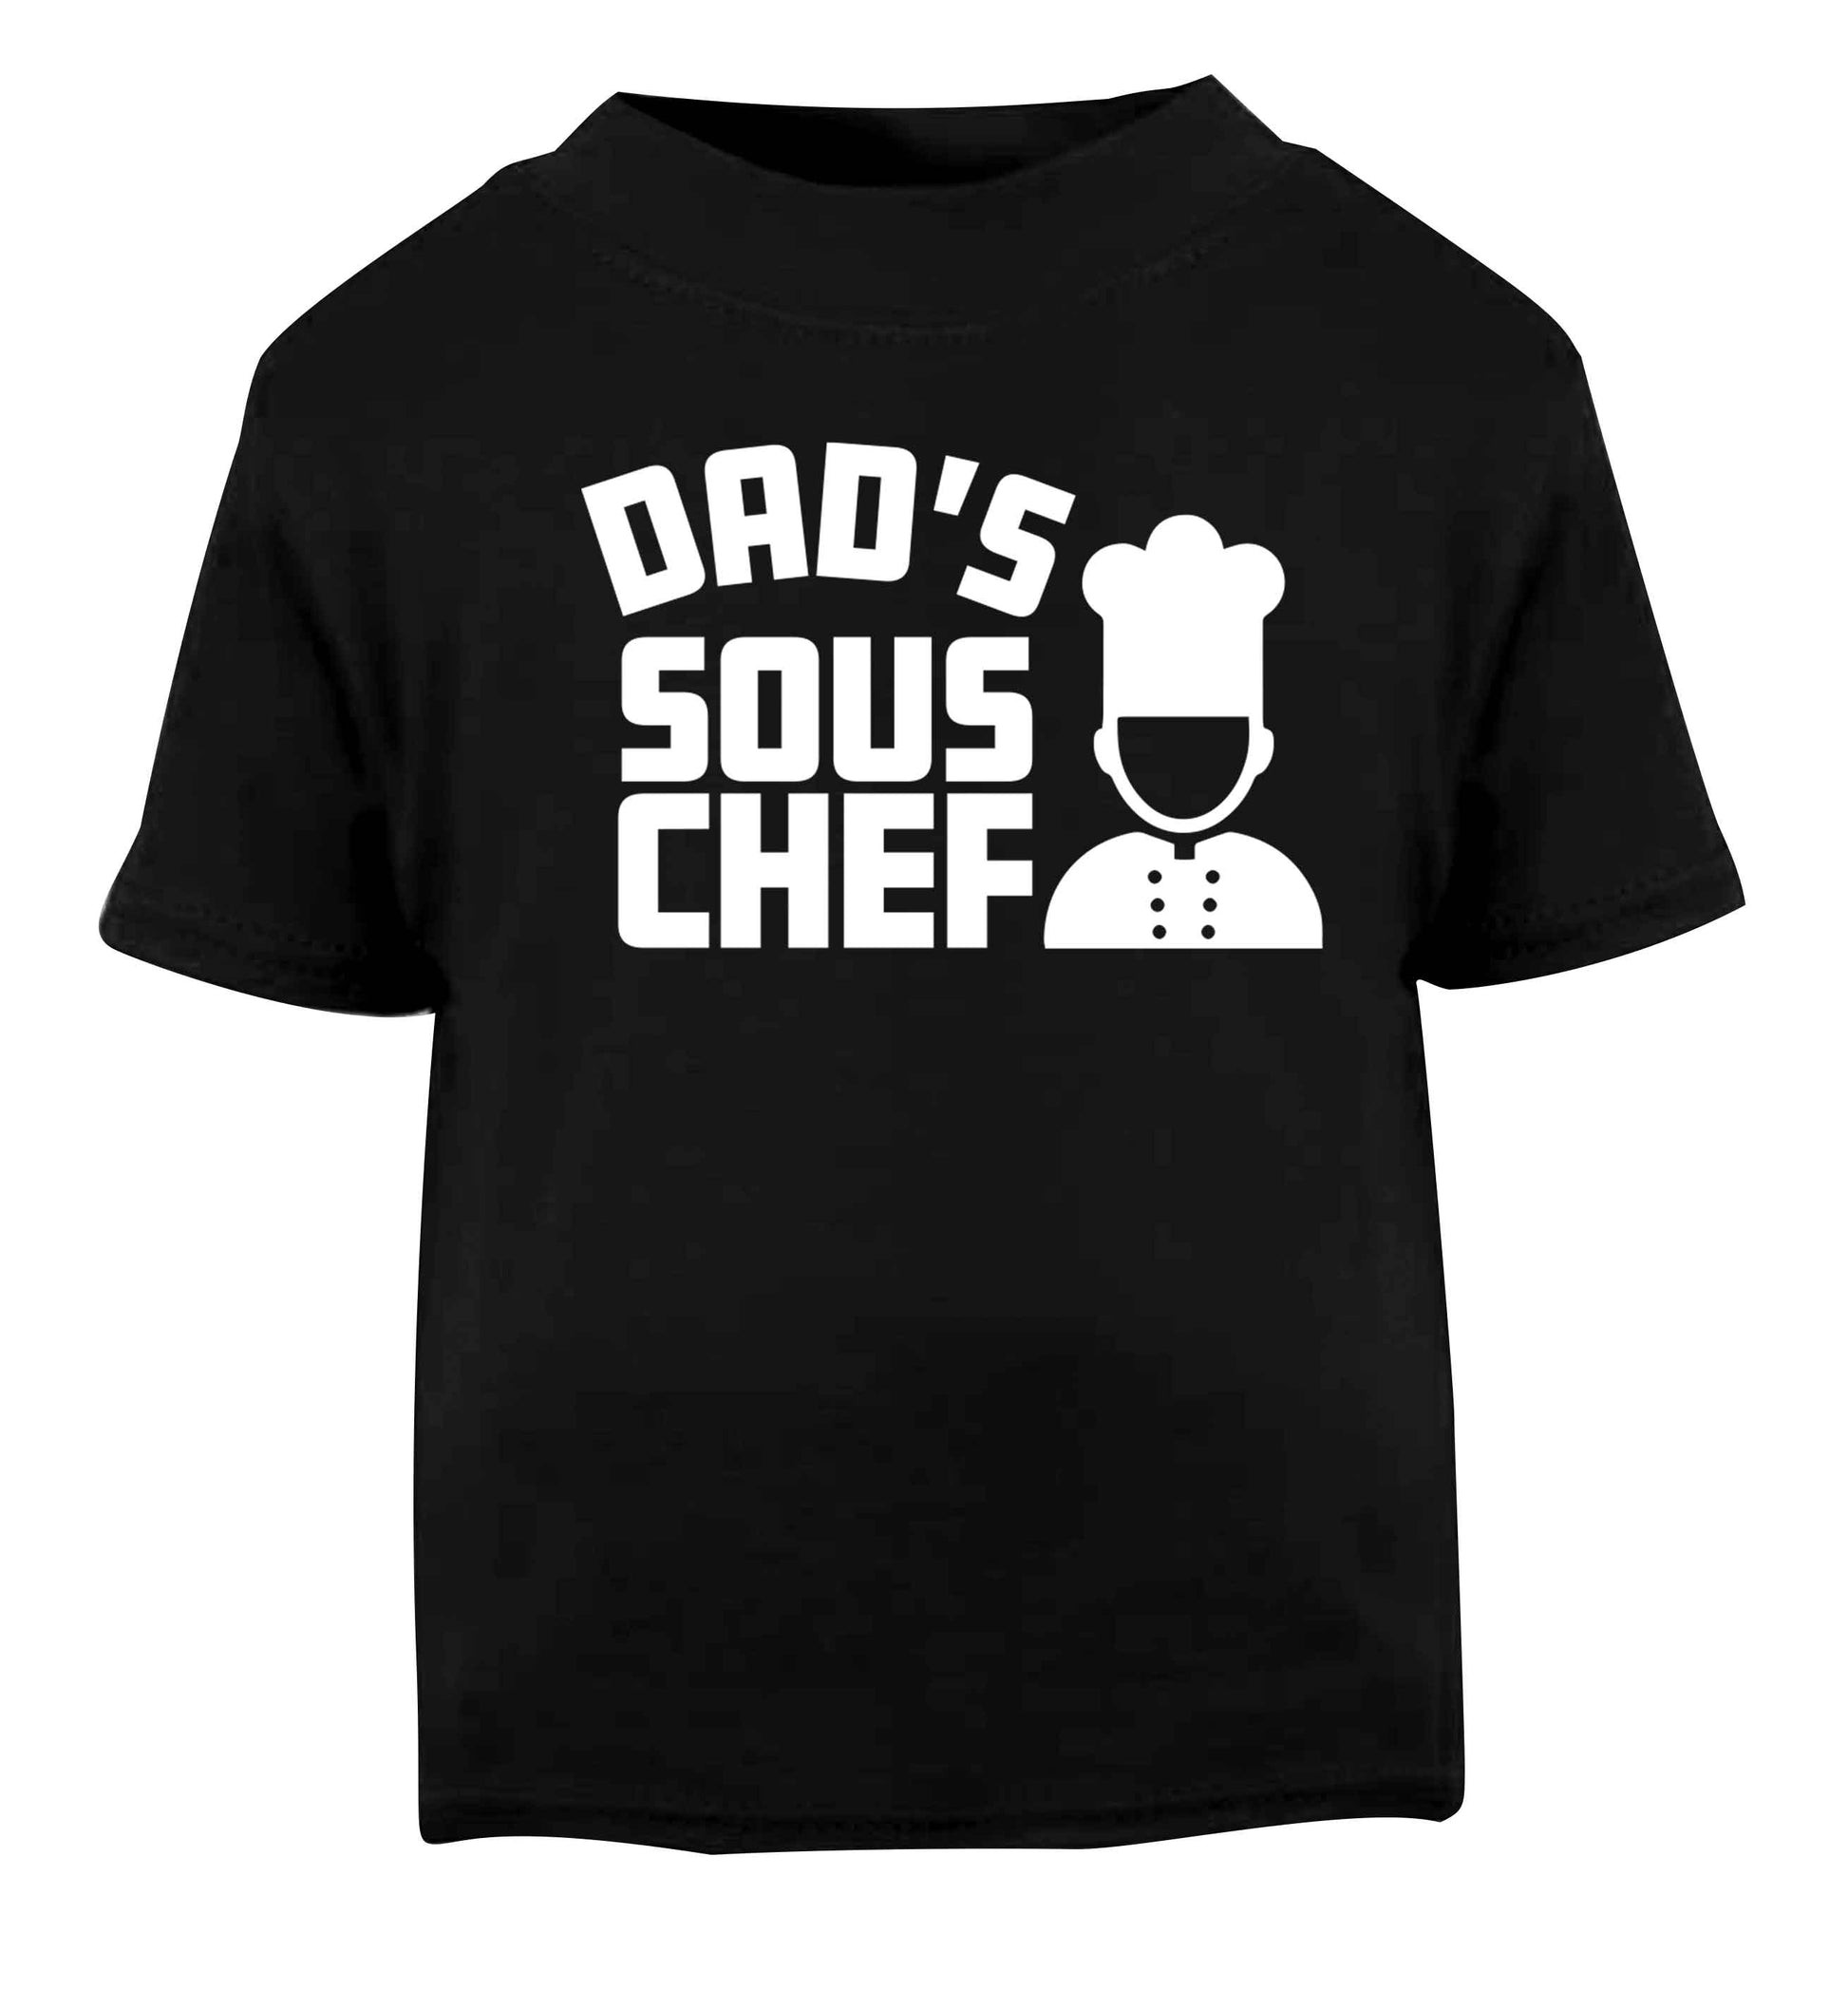 Dad's sous chef Black baby toddler Tshirt 2 years